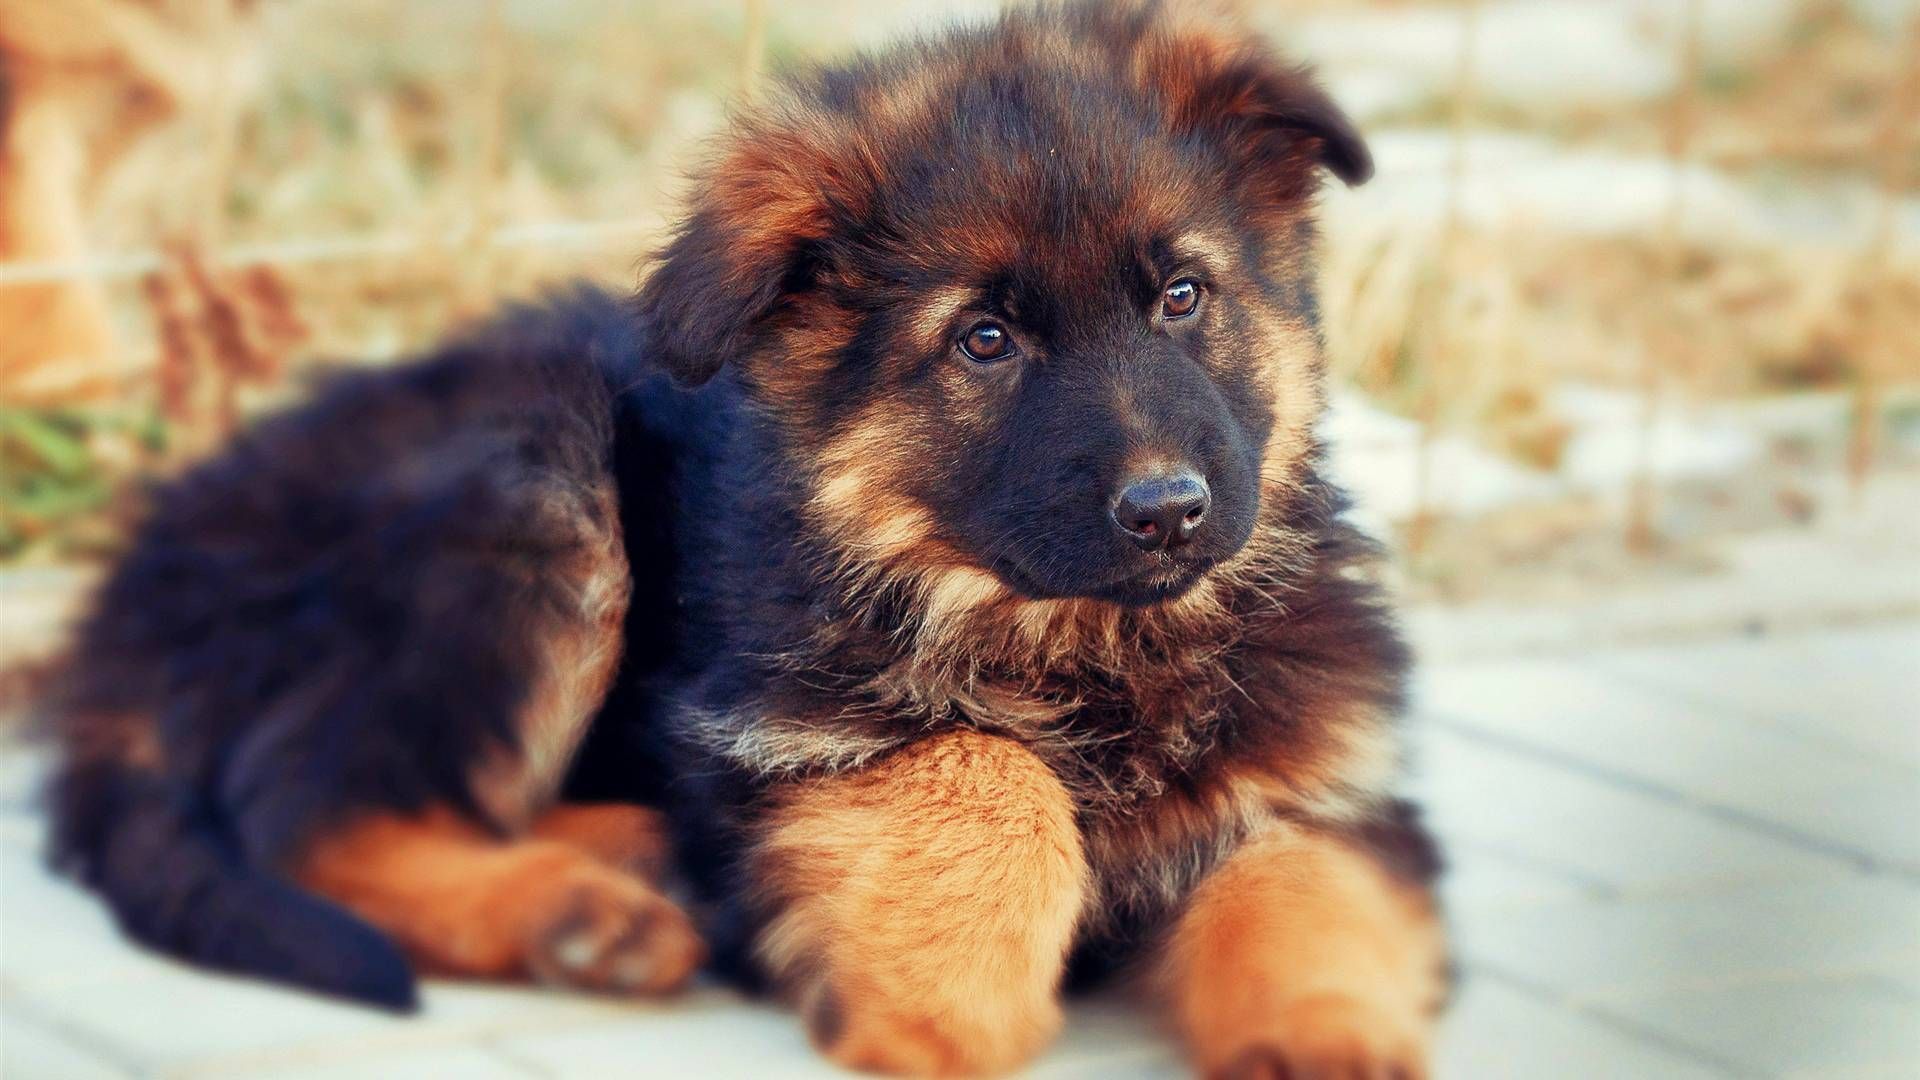 German Shepherd Puppies That You'll Want to Take Home Immediately. German shepherd puppies, Shepherd puppies, Small dog rescue